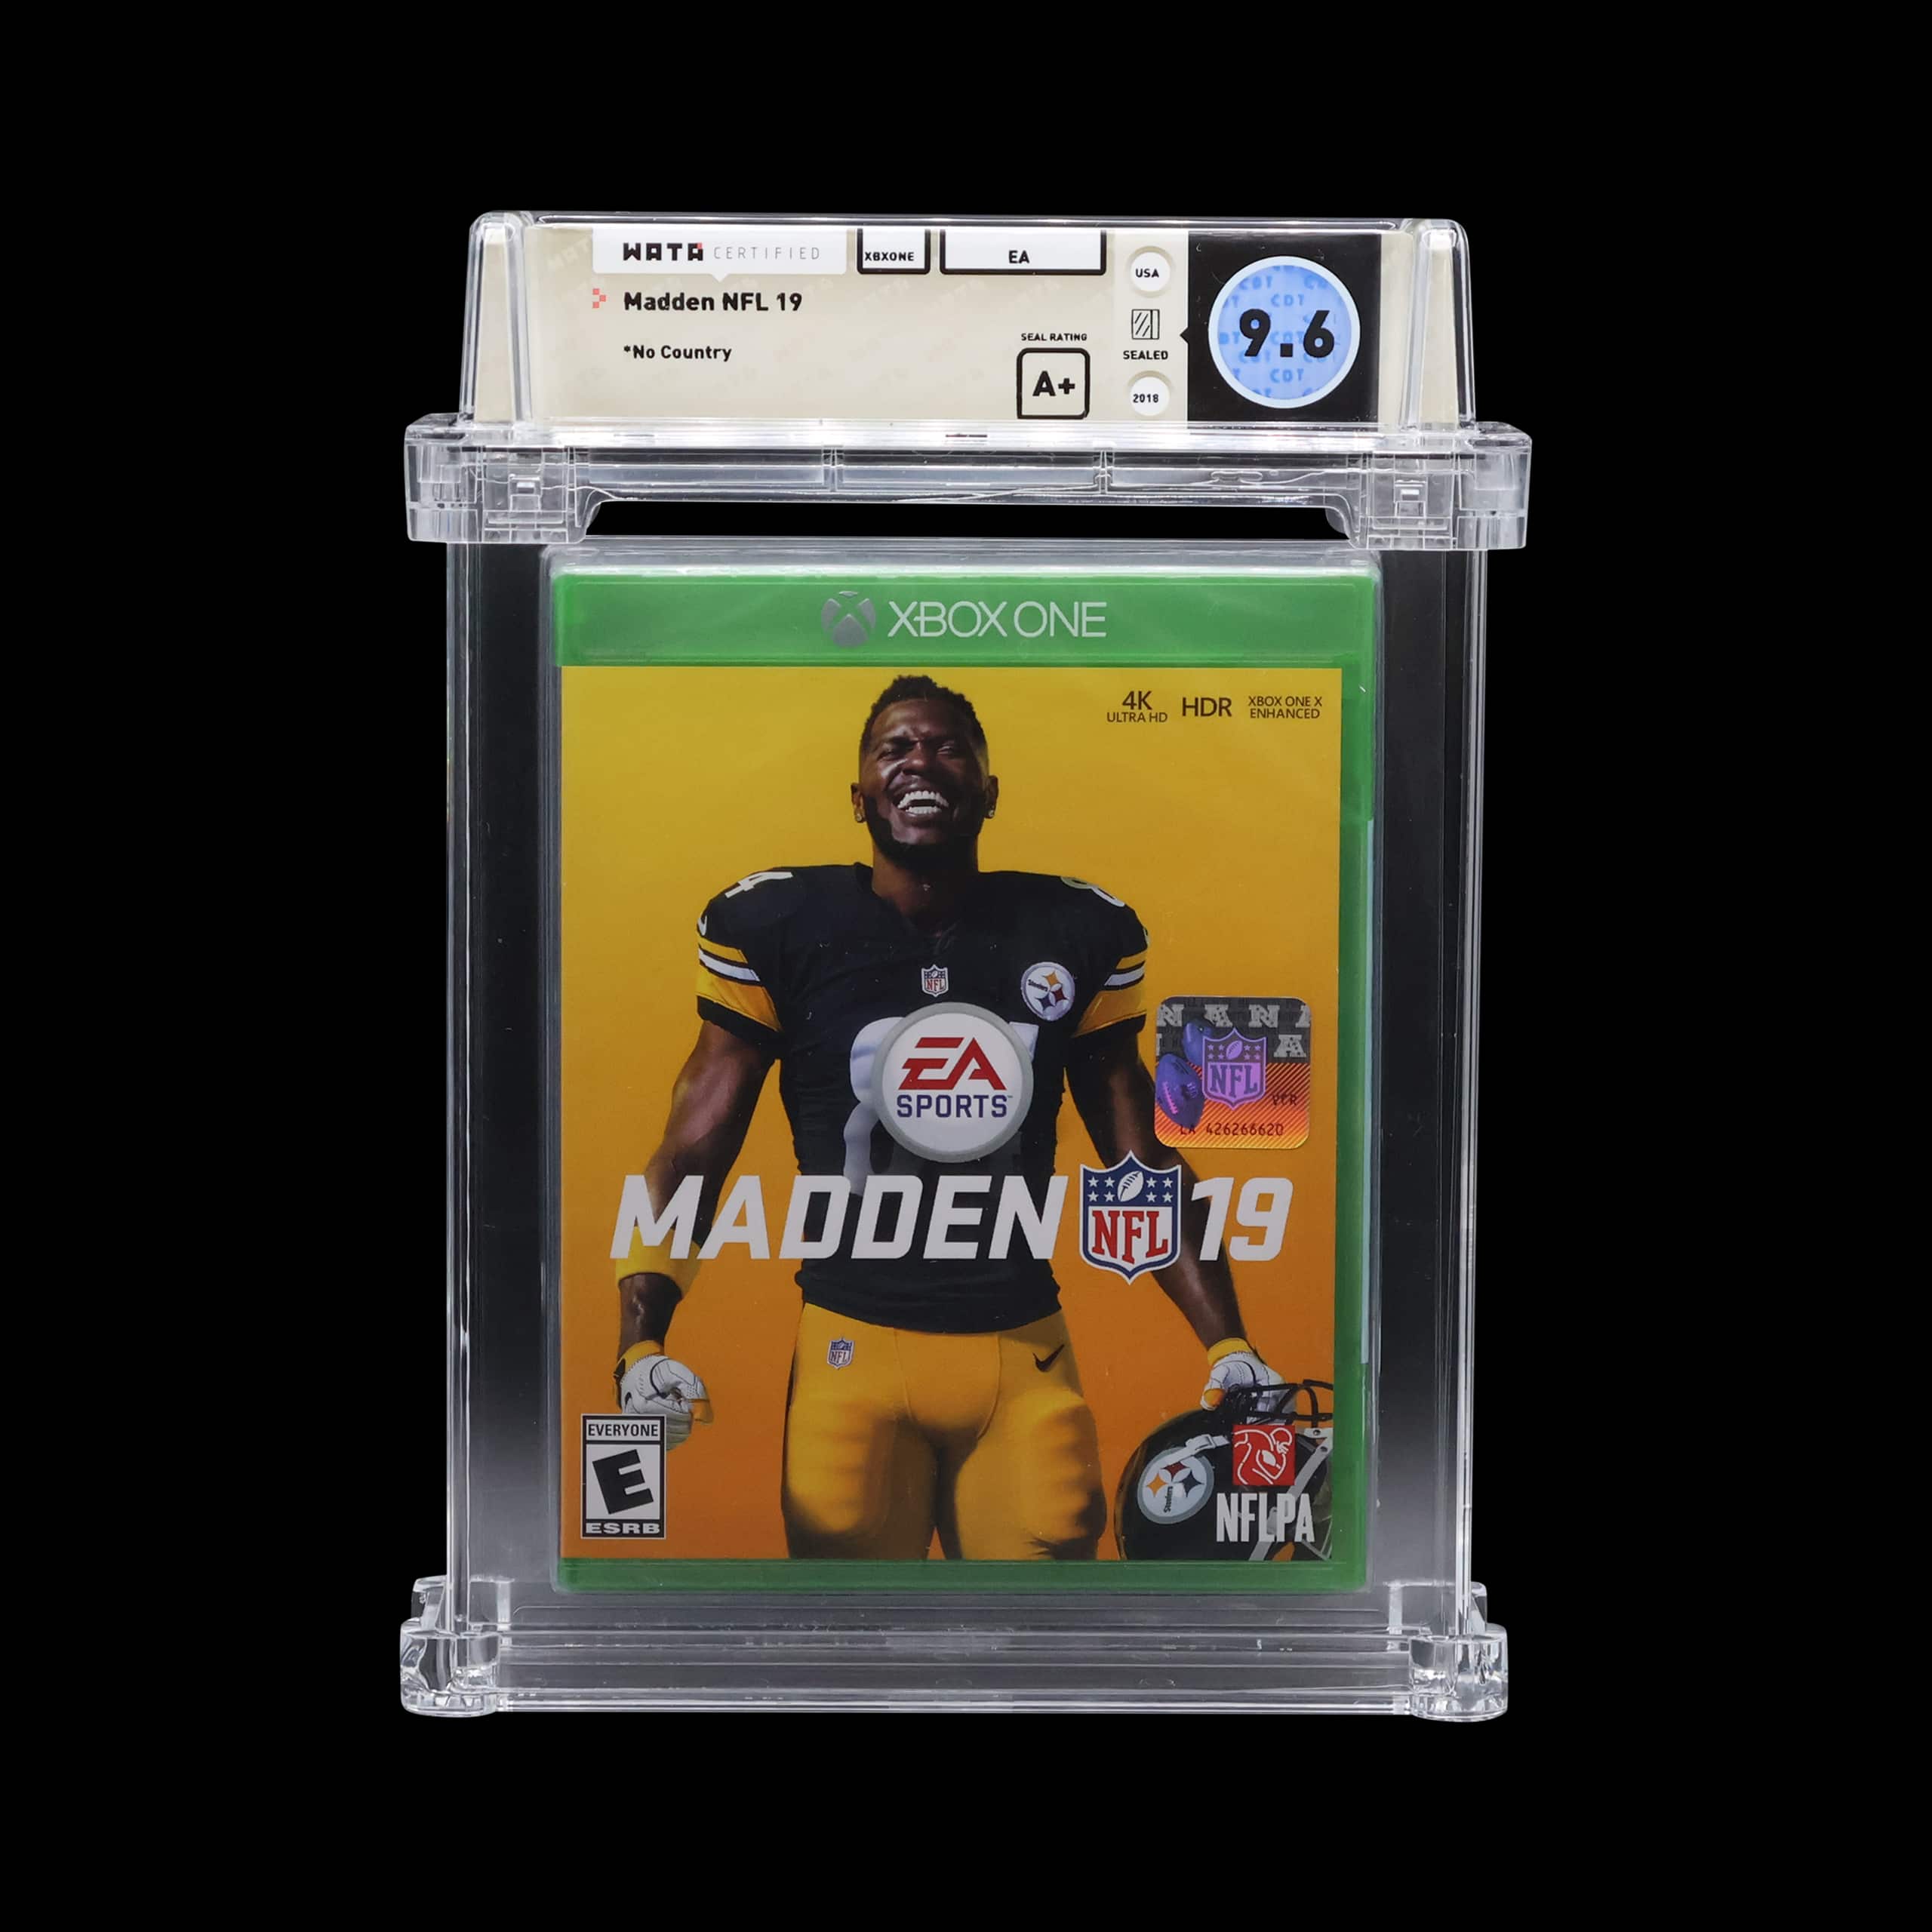 Madden NFL 19 Xbox One game, graded 9.6 and encased for preservation.